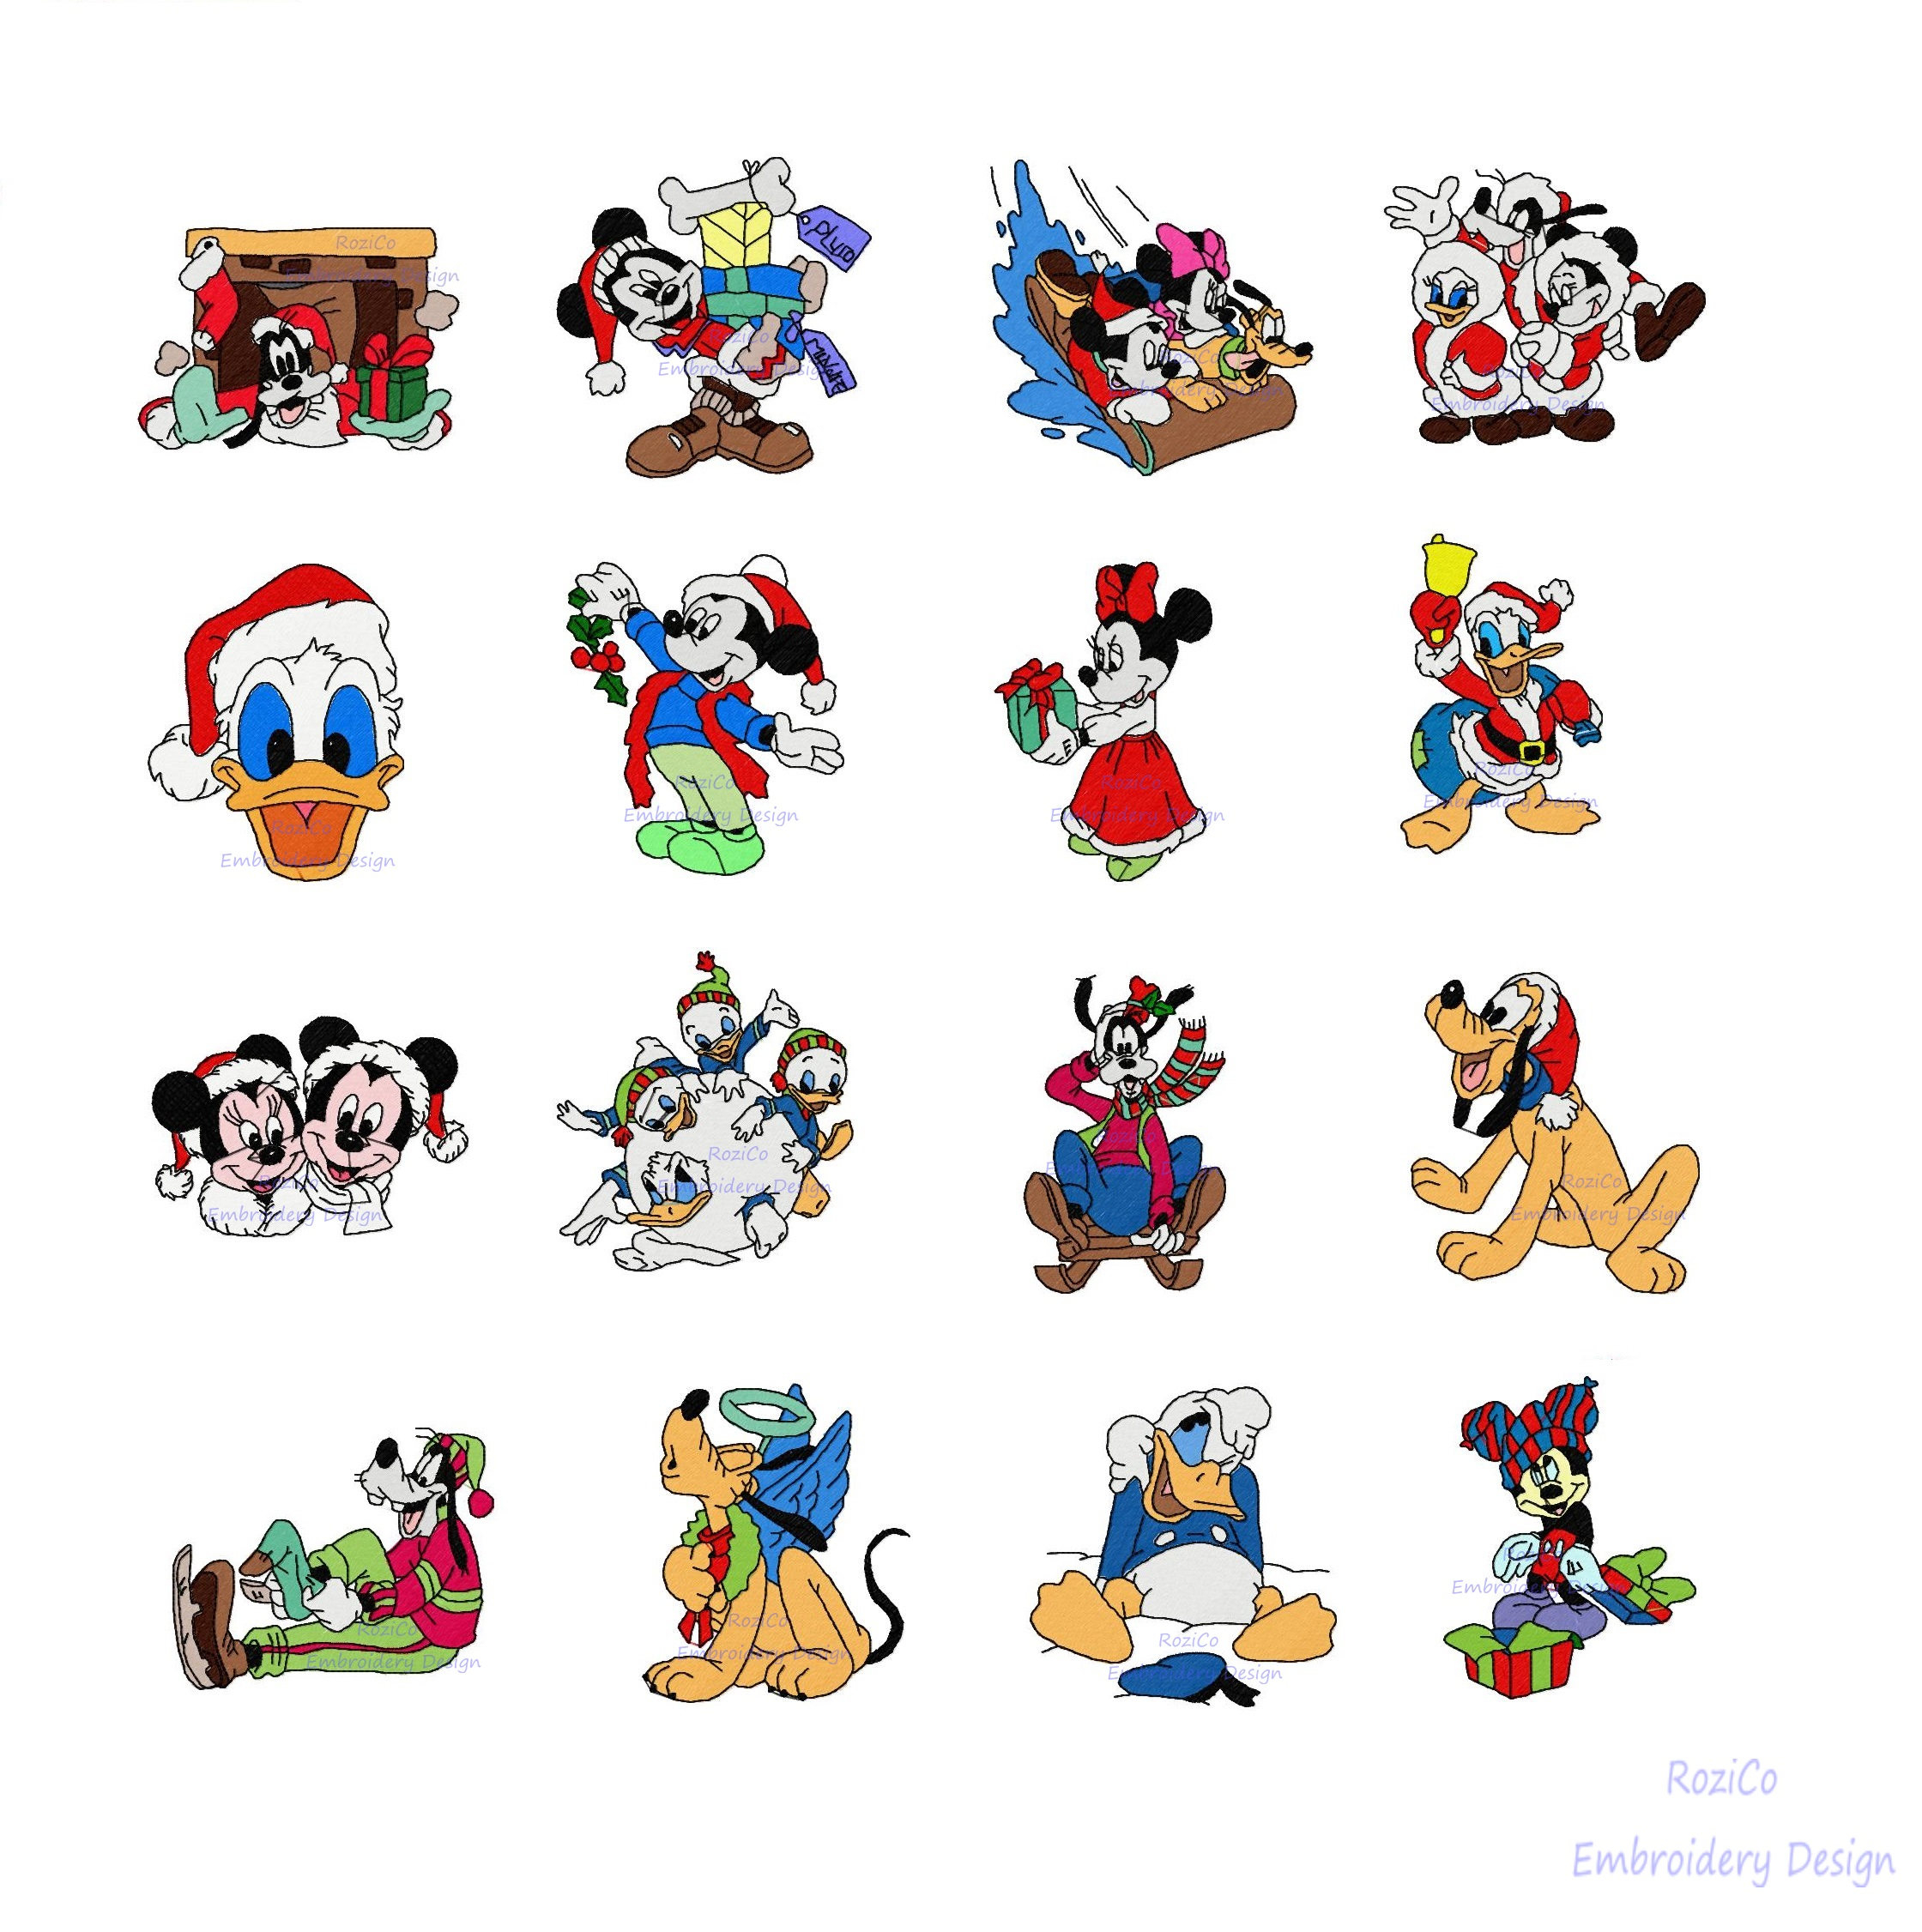 Disney Embroidery Patterns Sale Disney Embroidery Patterns Mickey Mouse And Friends 16 Designs 11 Formats Hristmas File Children Embroidery Instant Download